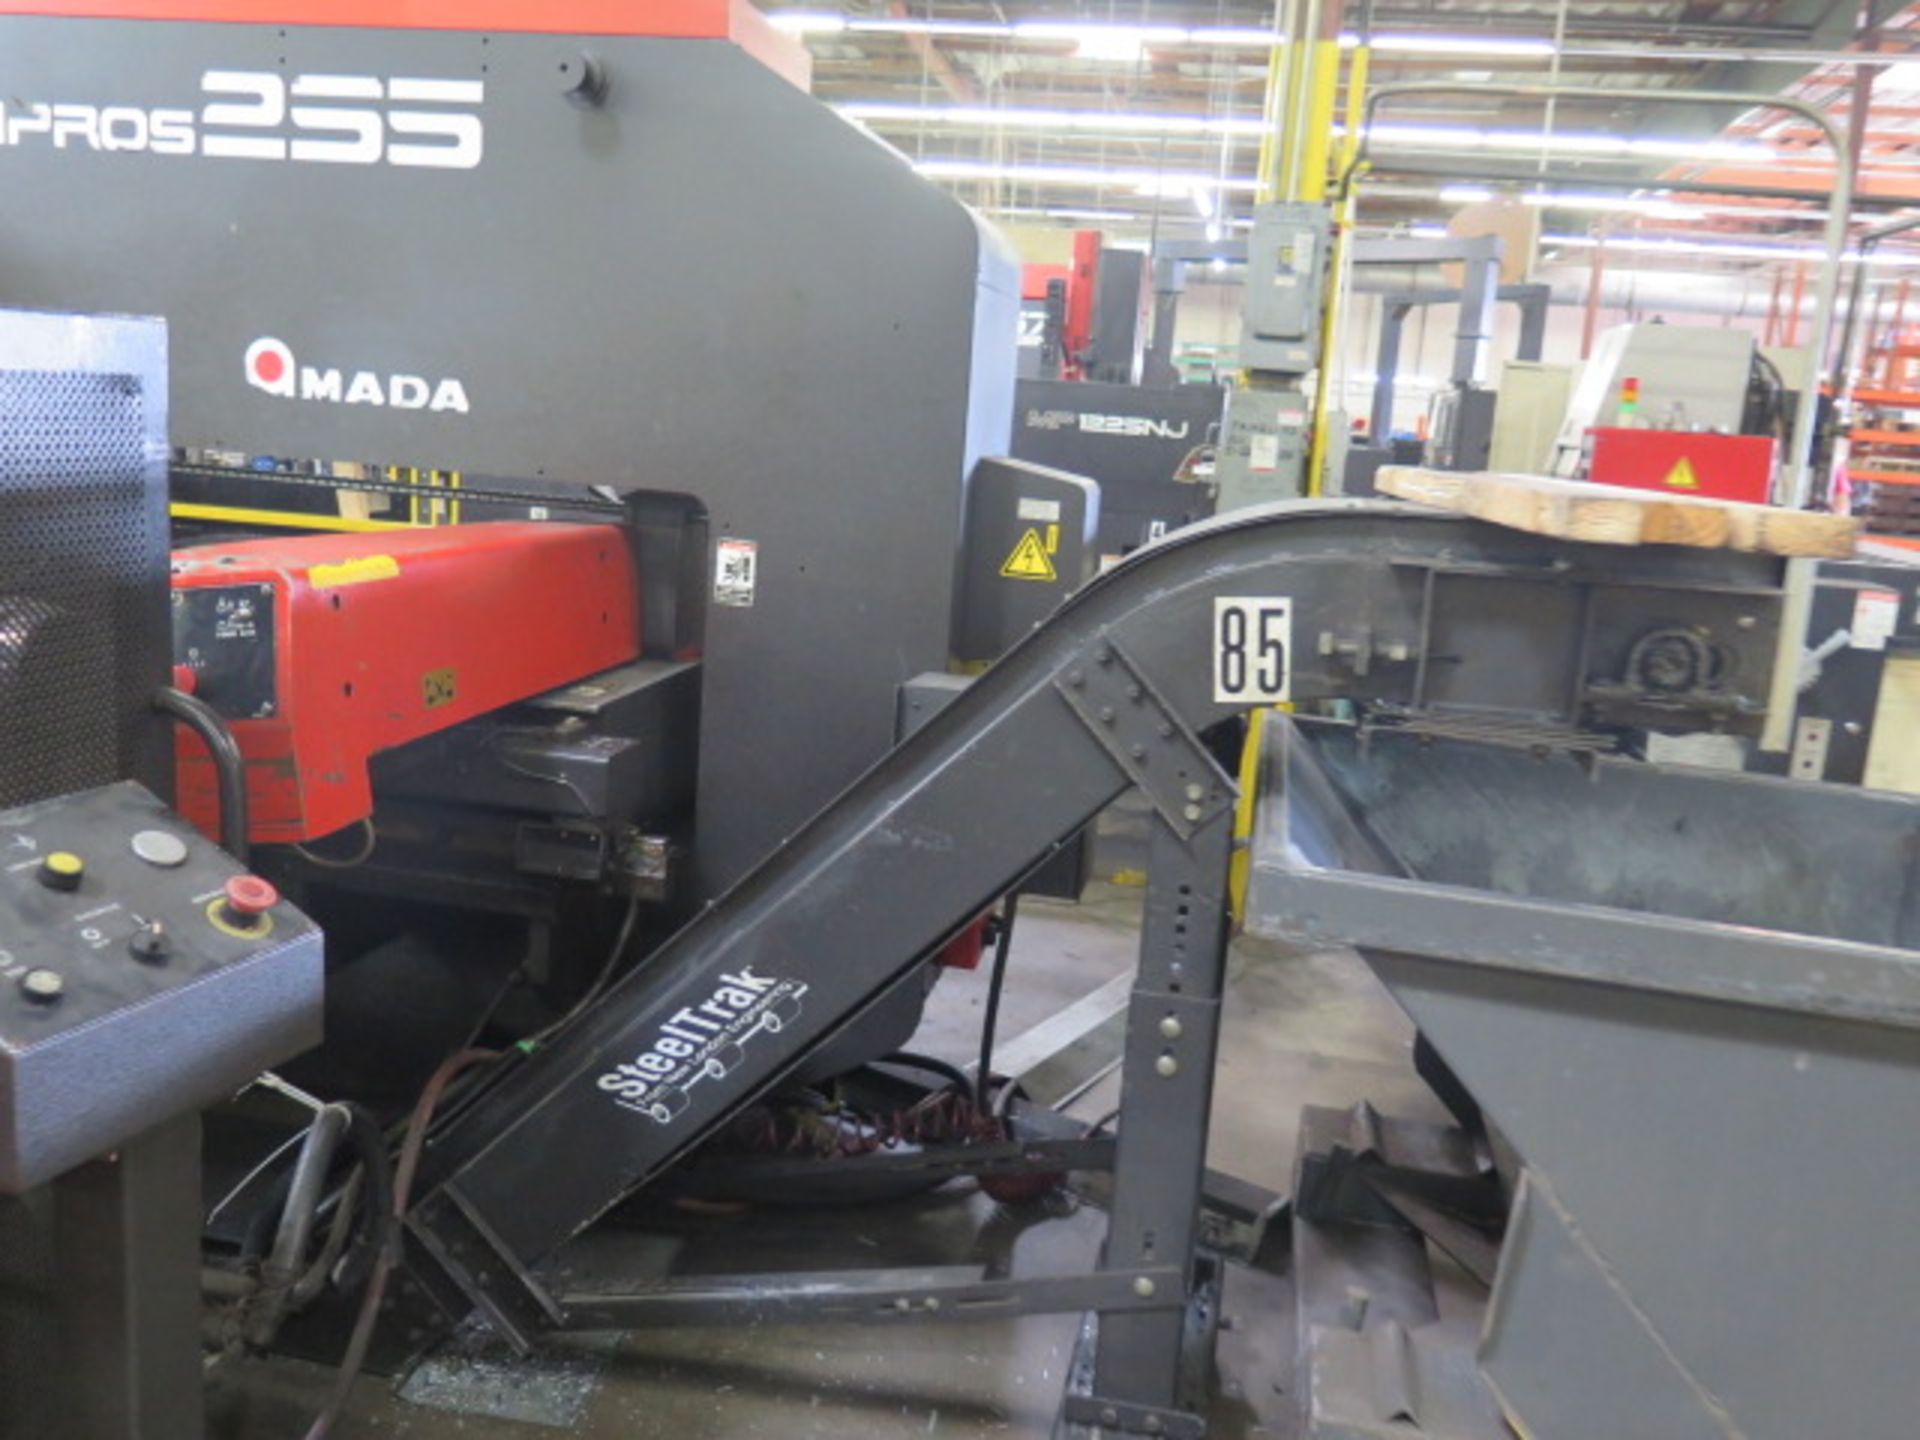 1997 Amada VIPROS 255 20 Ton 31-Station CNC Turret Press s/n AVP55079 w/ Fanuc 18-P Con, SOLD AS IS - Image 10 of 27